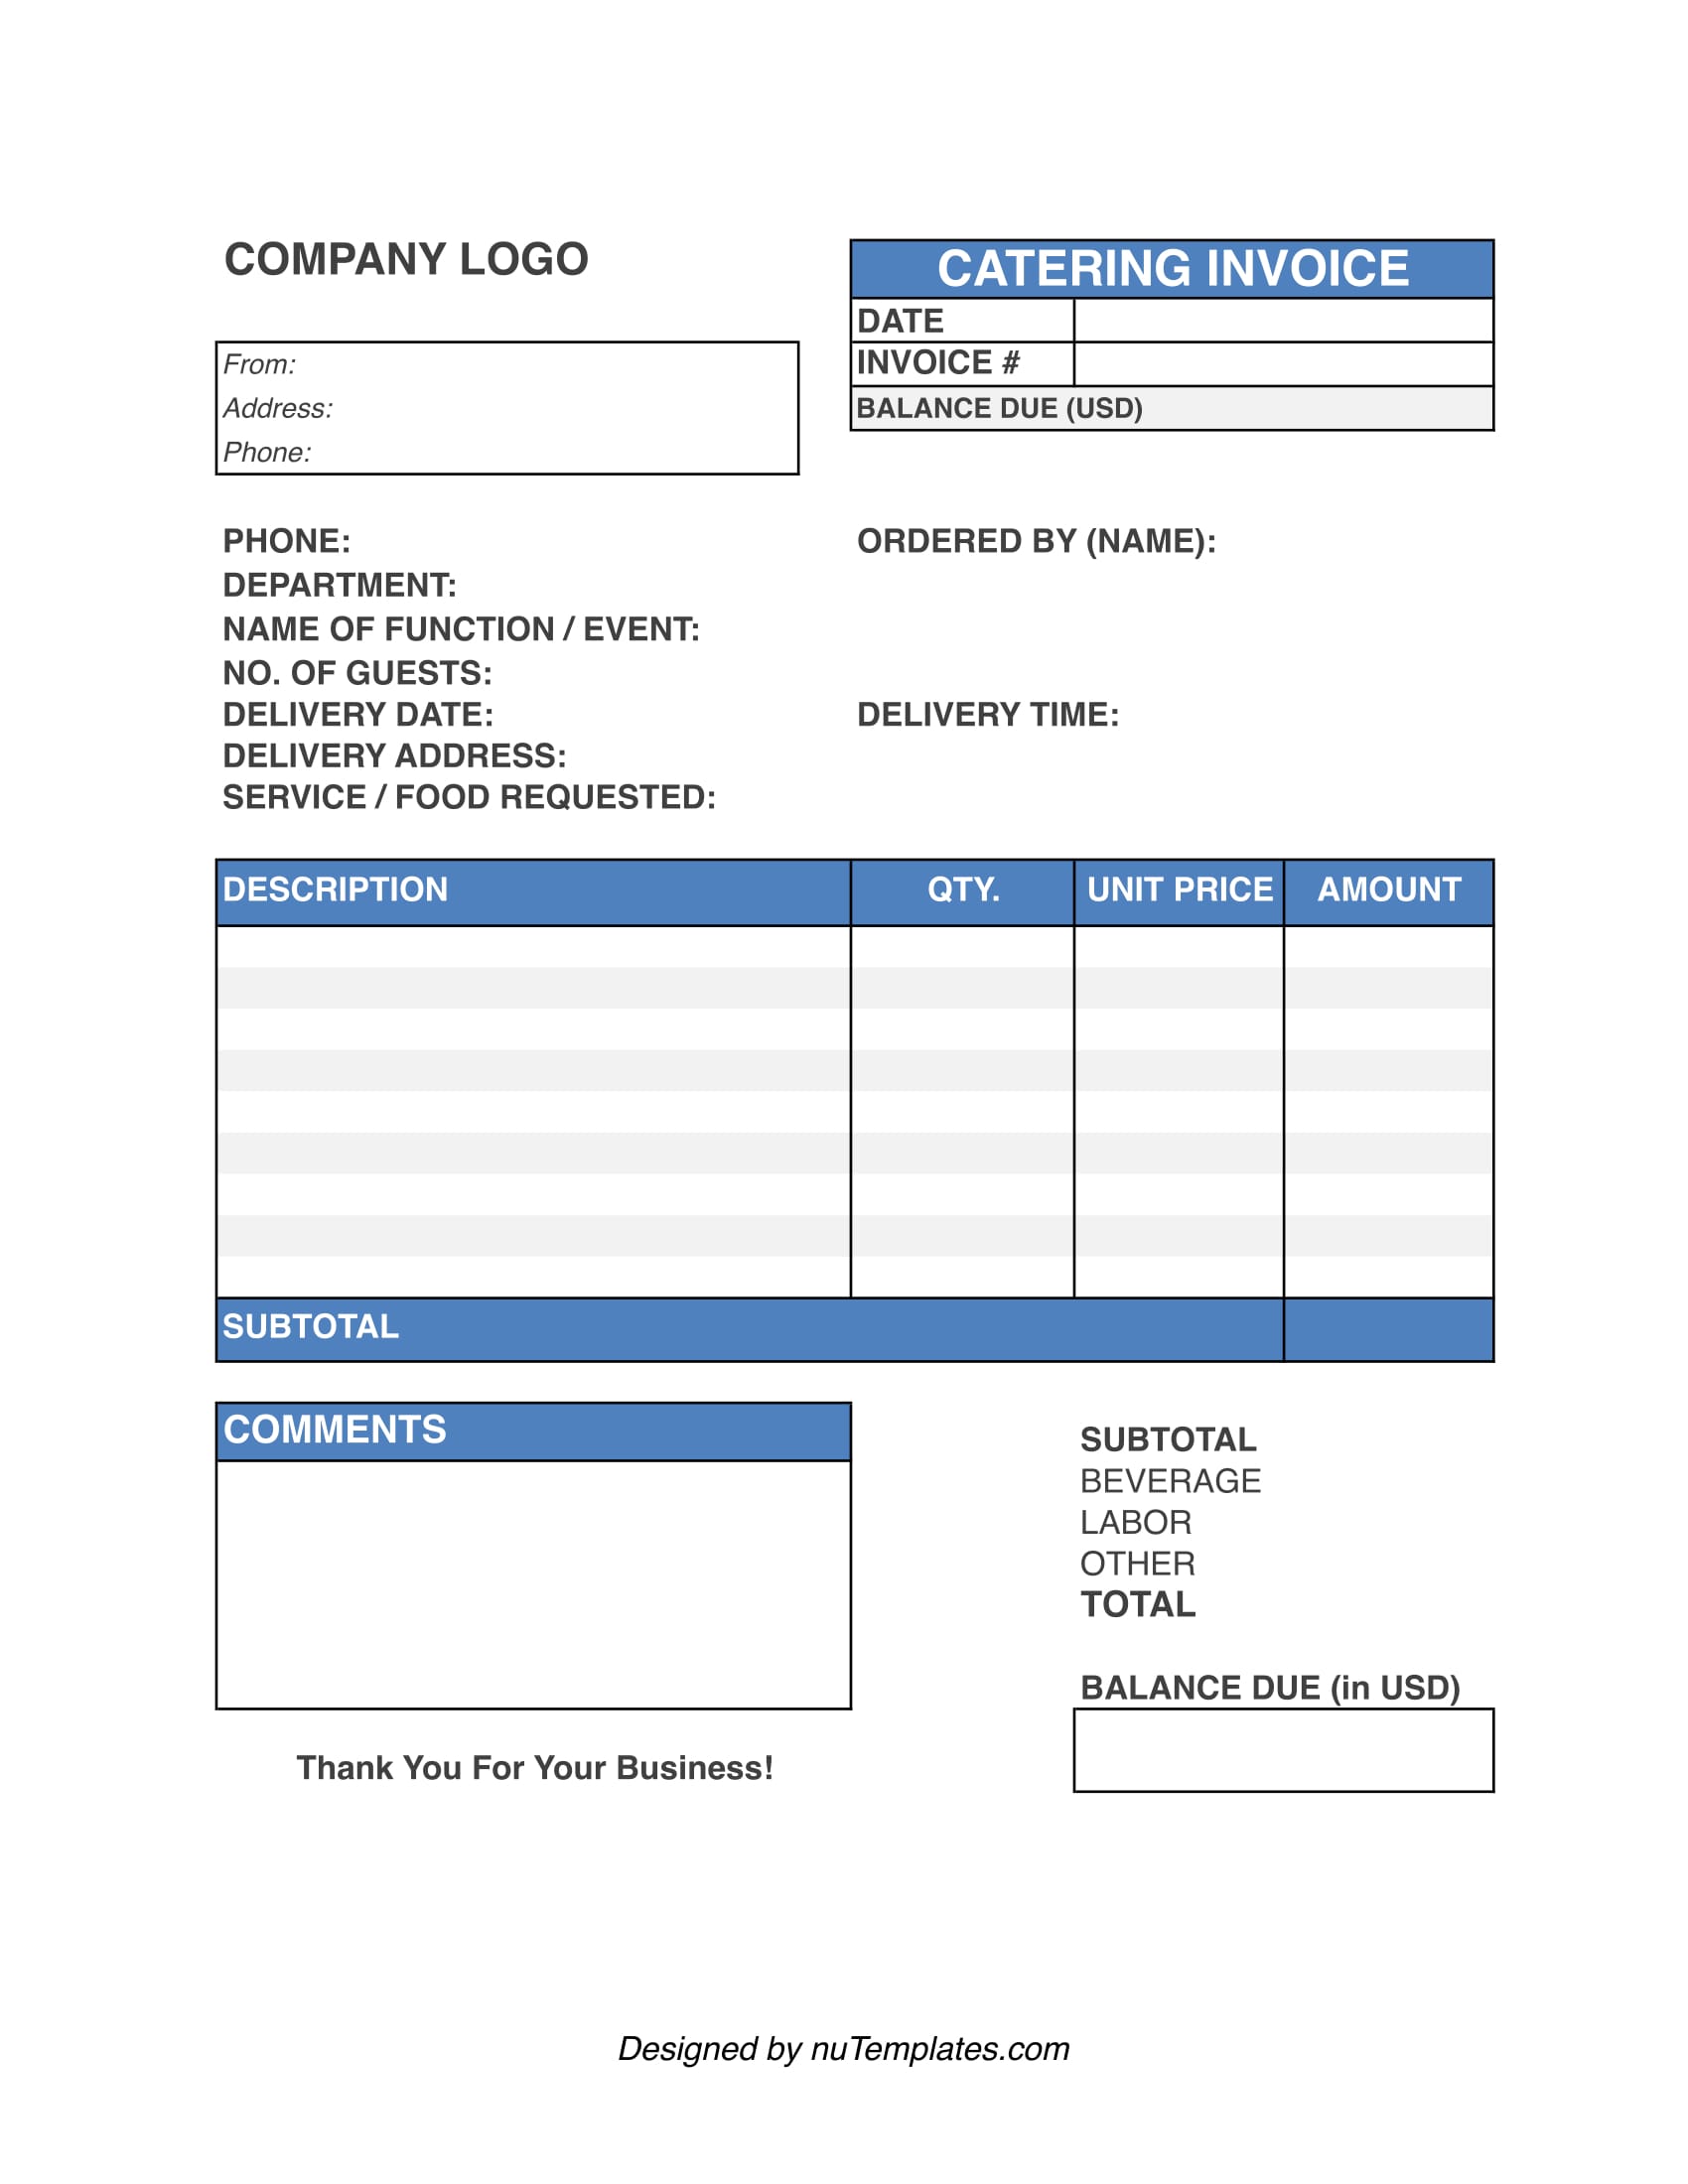 catering-invoice-template-excel-excel-templates